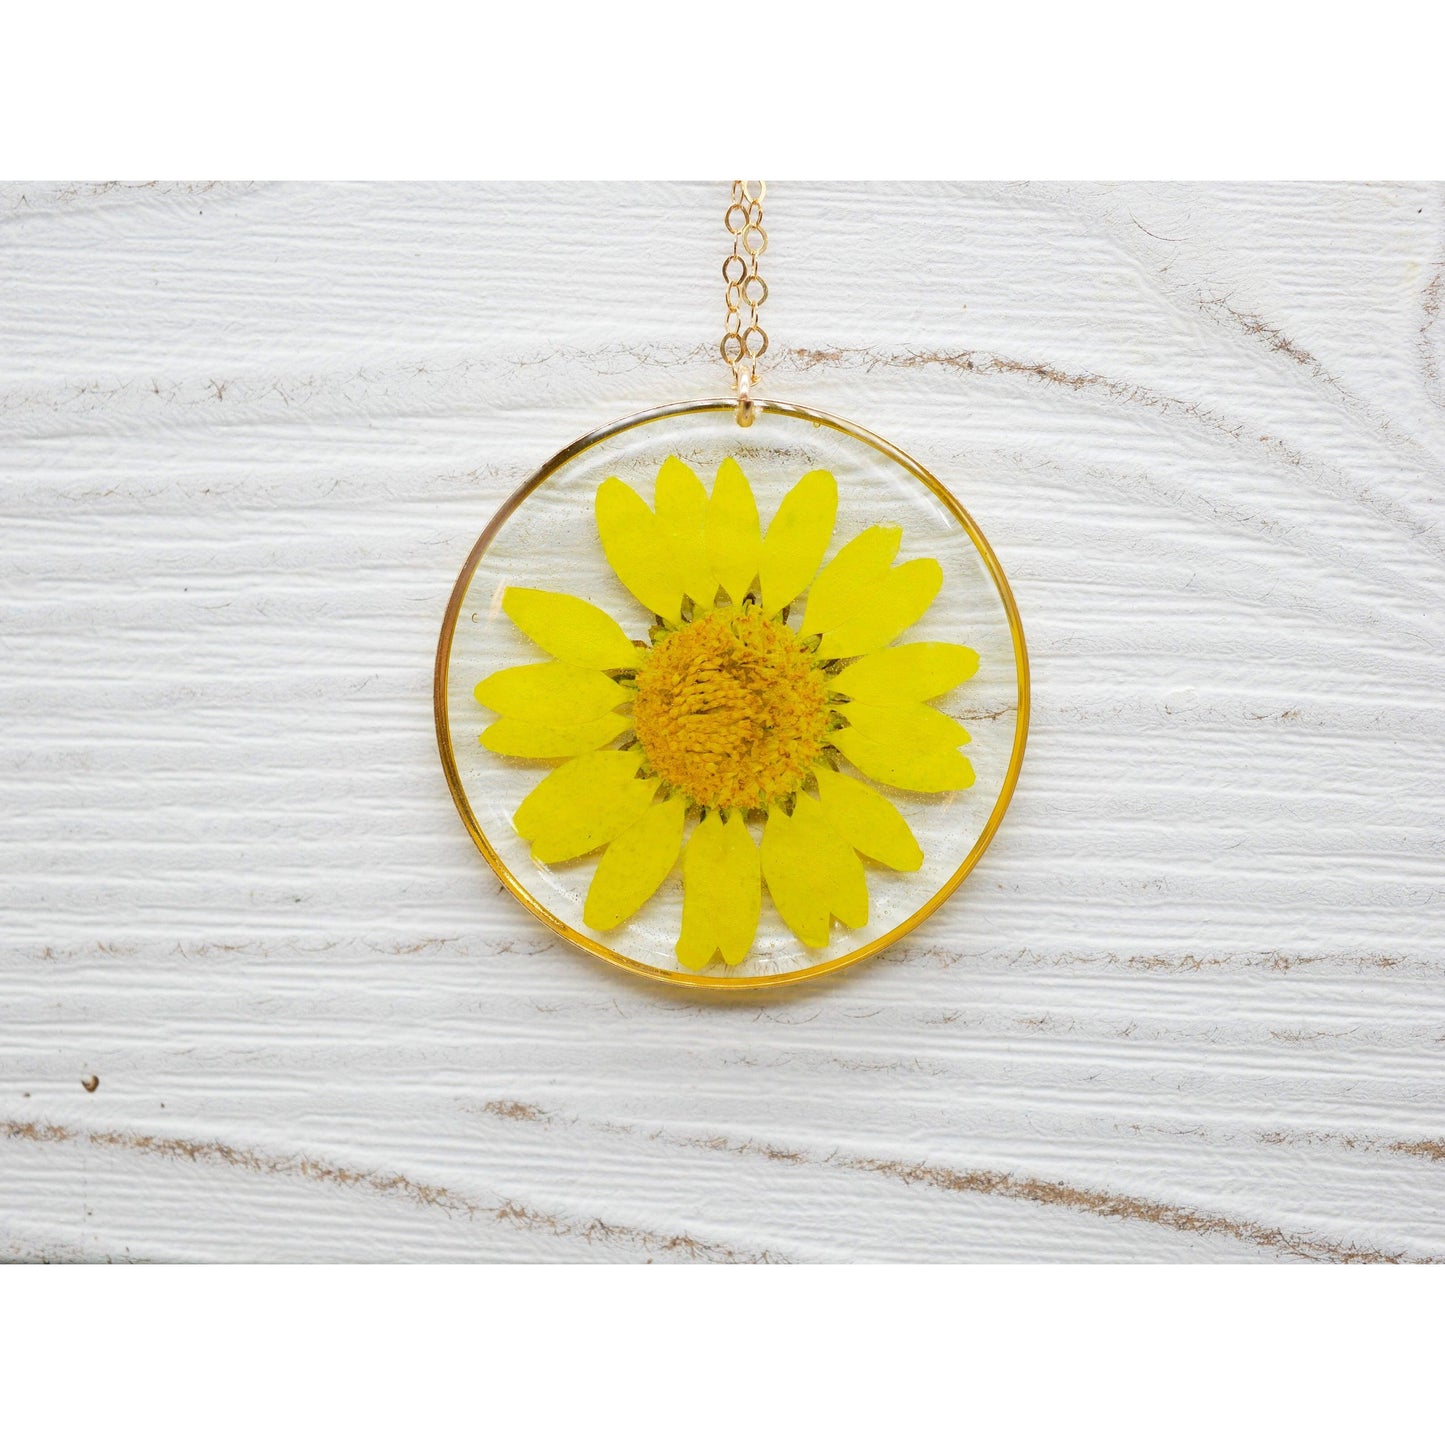 Yellow Daisy necklace - Remedy Design Shop